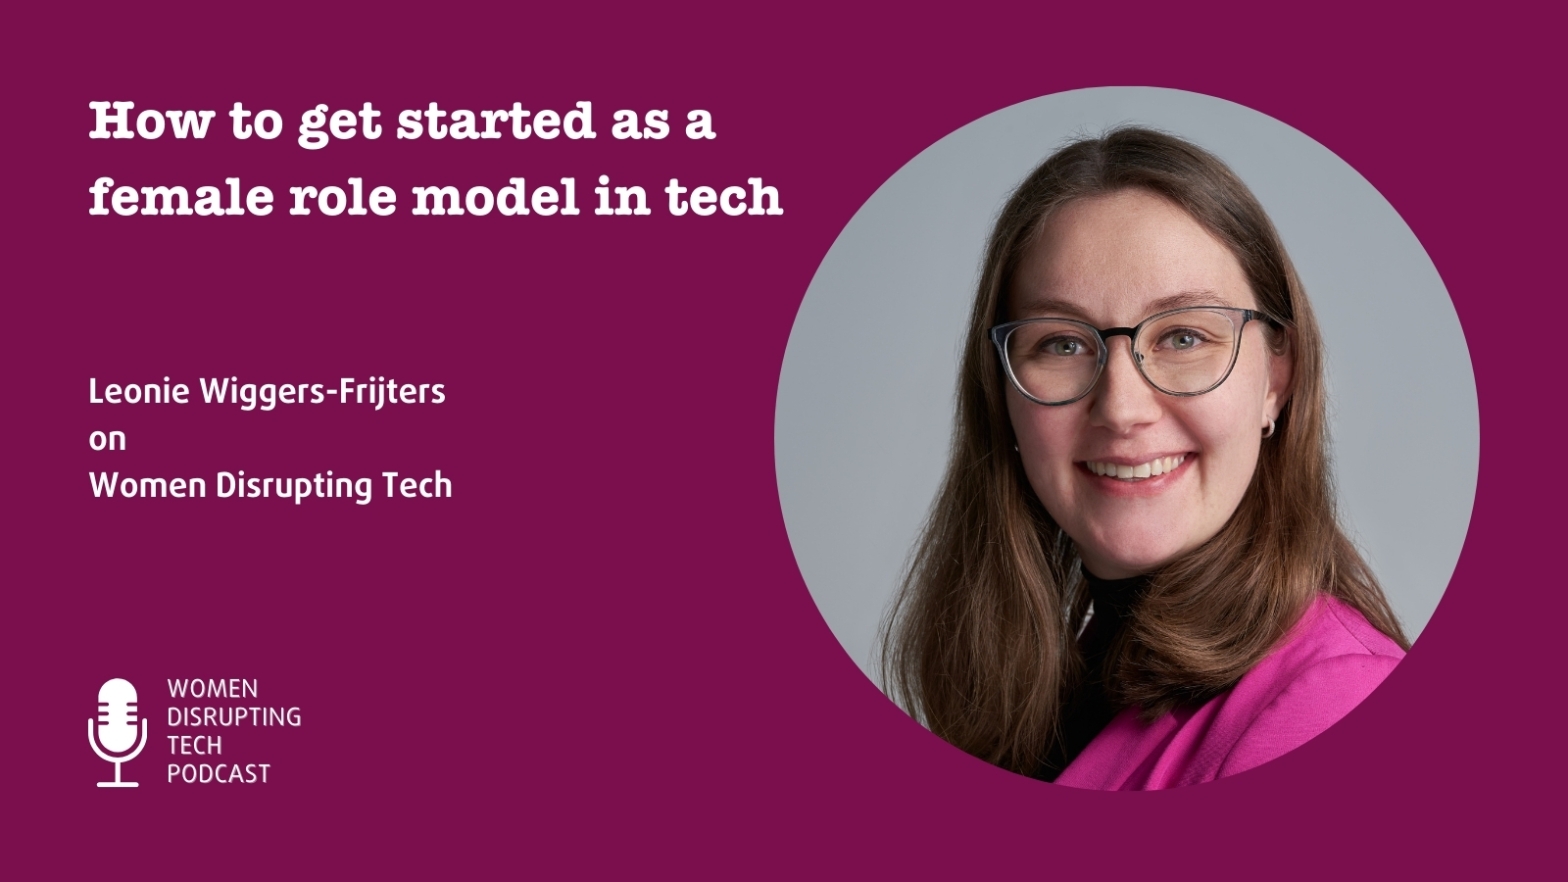 Picture of Leonie Wiggers-Frijters who is a guest on episode 43 of the Women Disrupting Tech podcast titled ‘How to get started as a female role model in tech’.